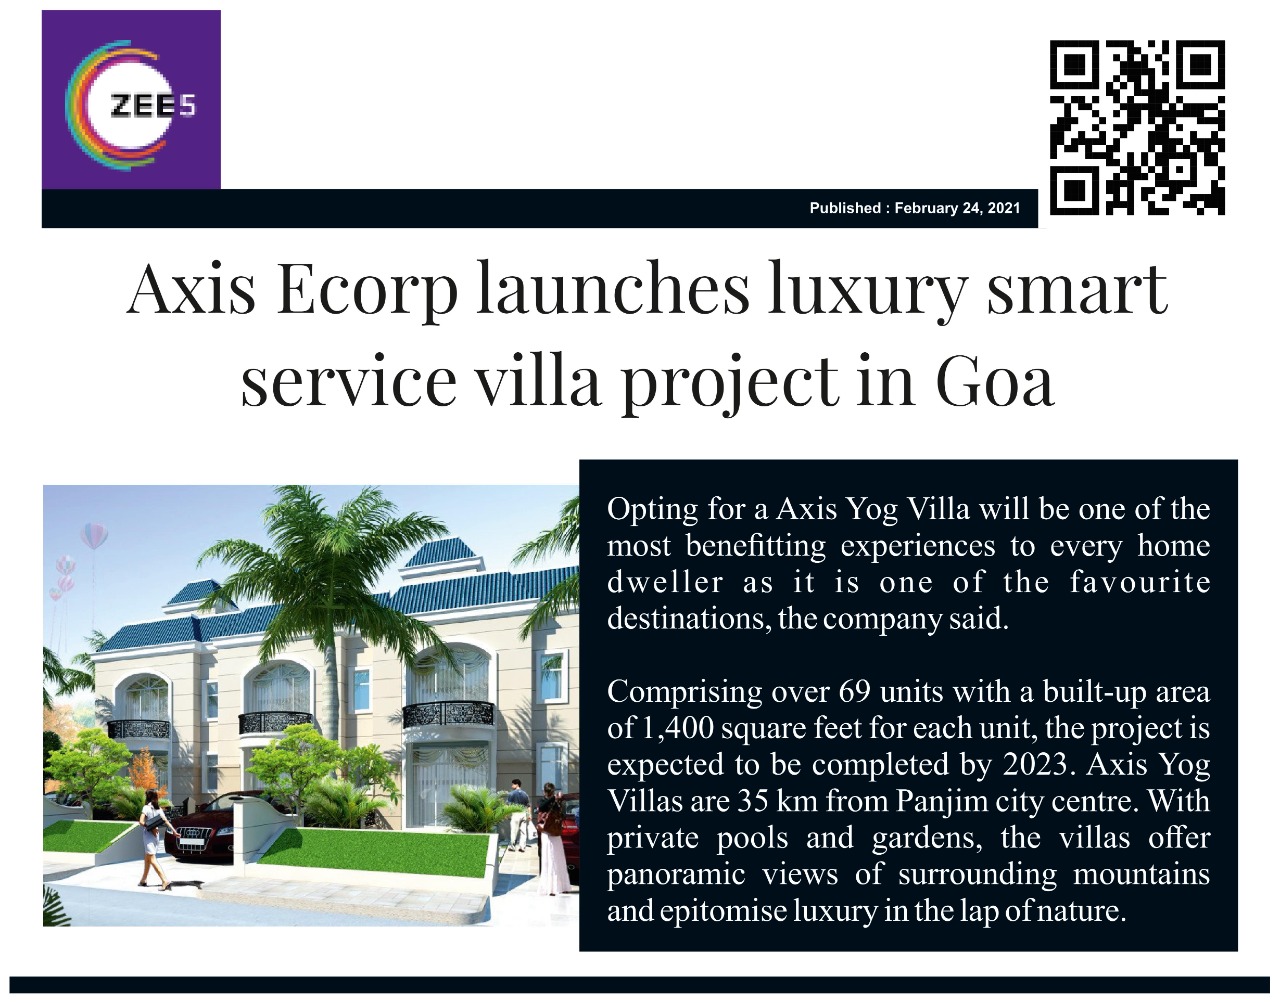 Axis Ecorp to invest Rs 100 crore